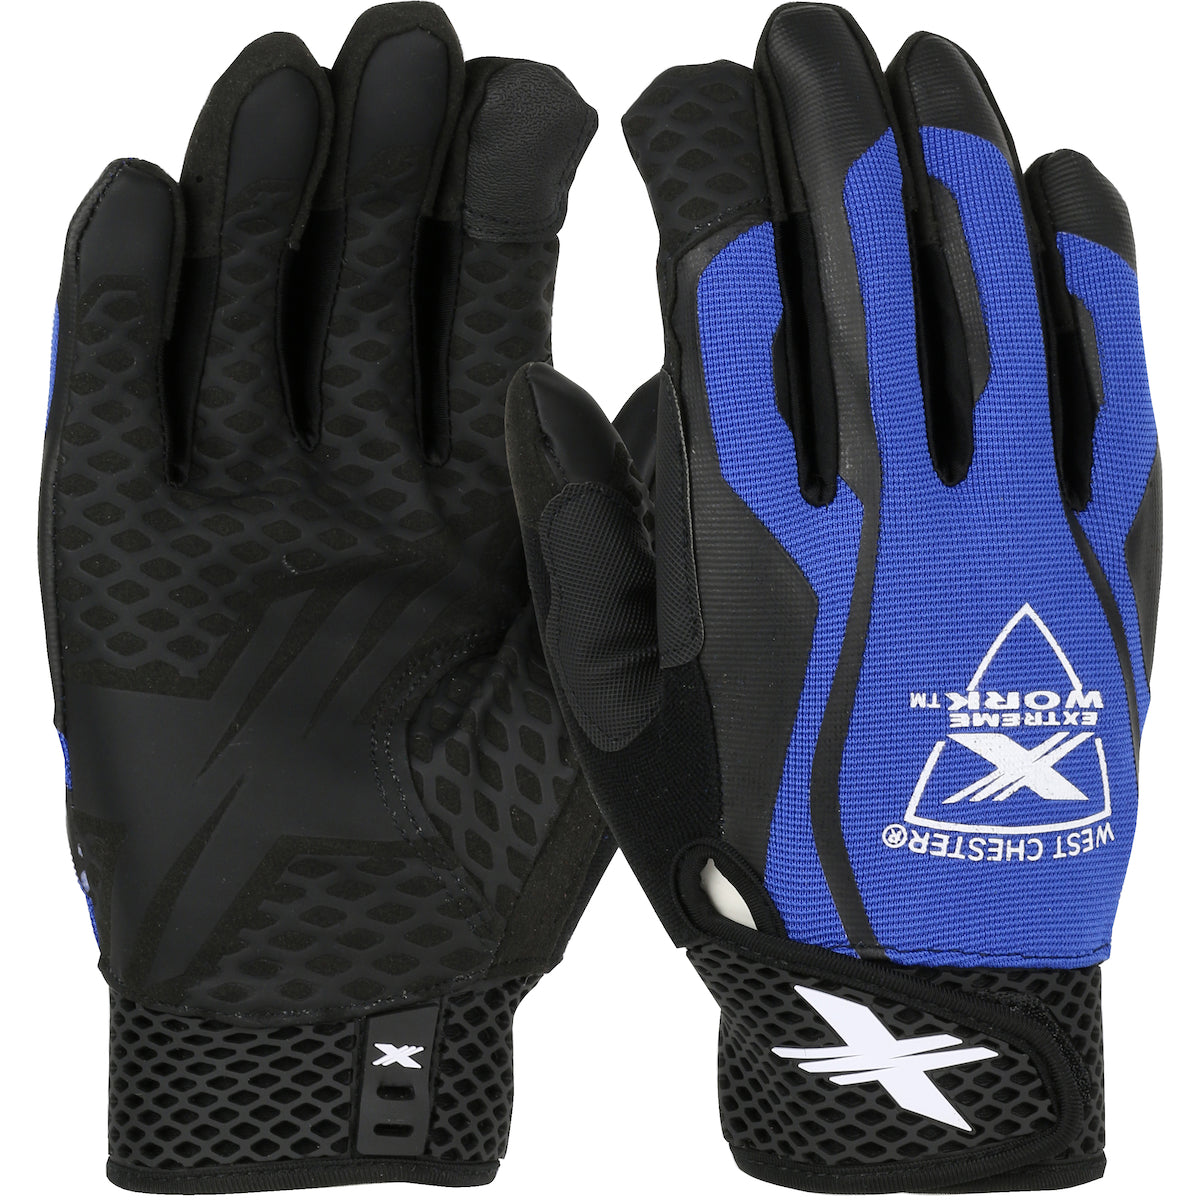 West Chester 89302/M Synthetic Leather Palm with Silicone Grip, Blue Fabric Back & Touchscreen Index Finger - XLock Cuff